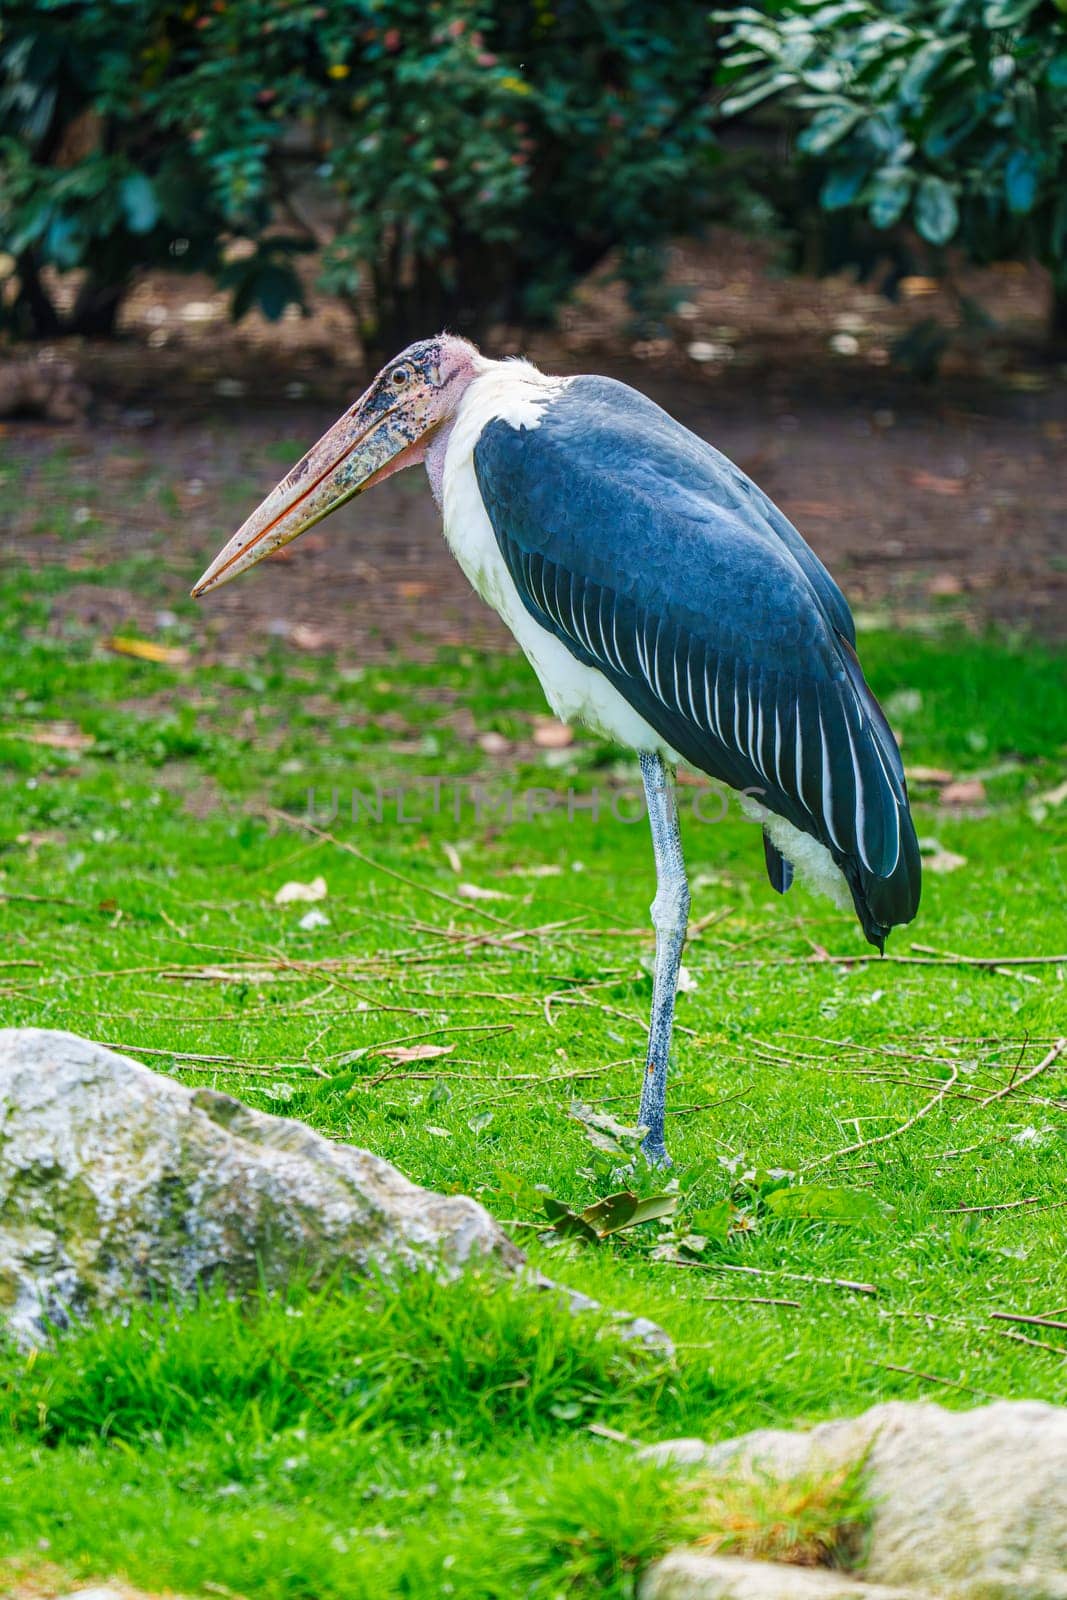 Capture the stunning details of a marabou stork in this close-up shot. The bird's distinctive beak and intricate feathers are highlighted, offering a glimpse into its captivating presence.